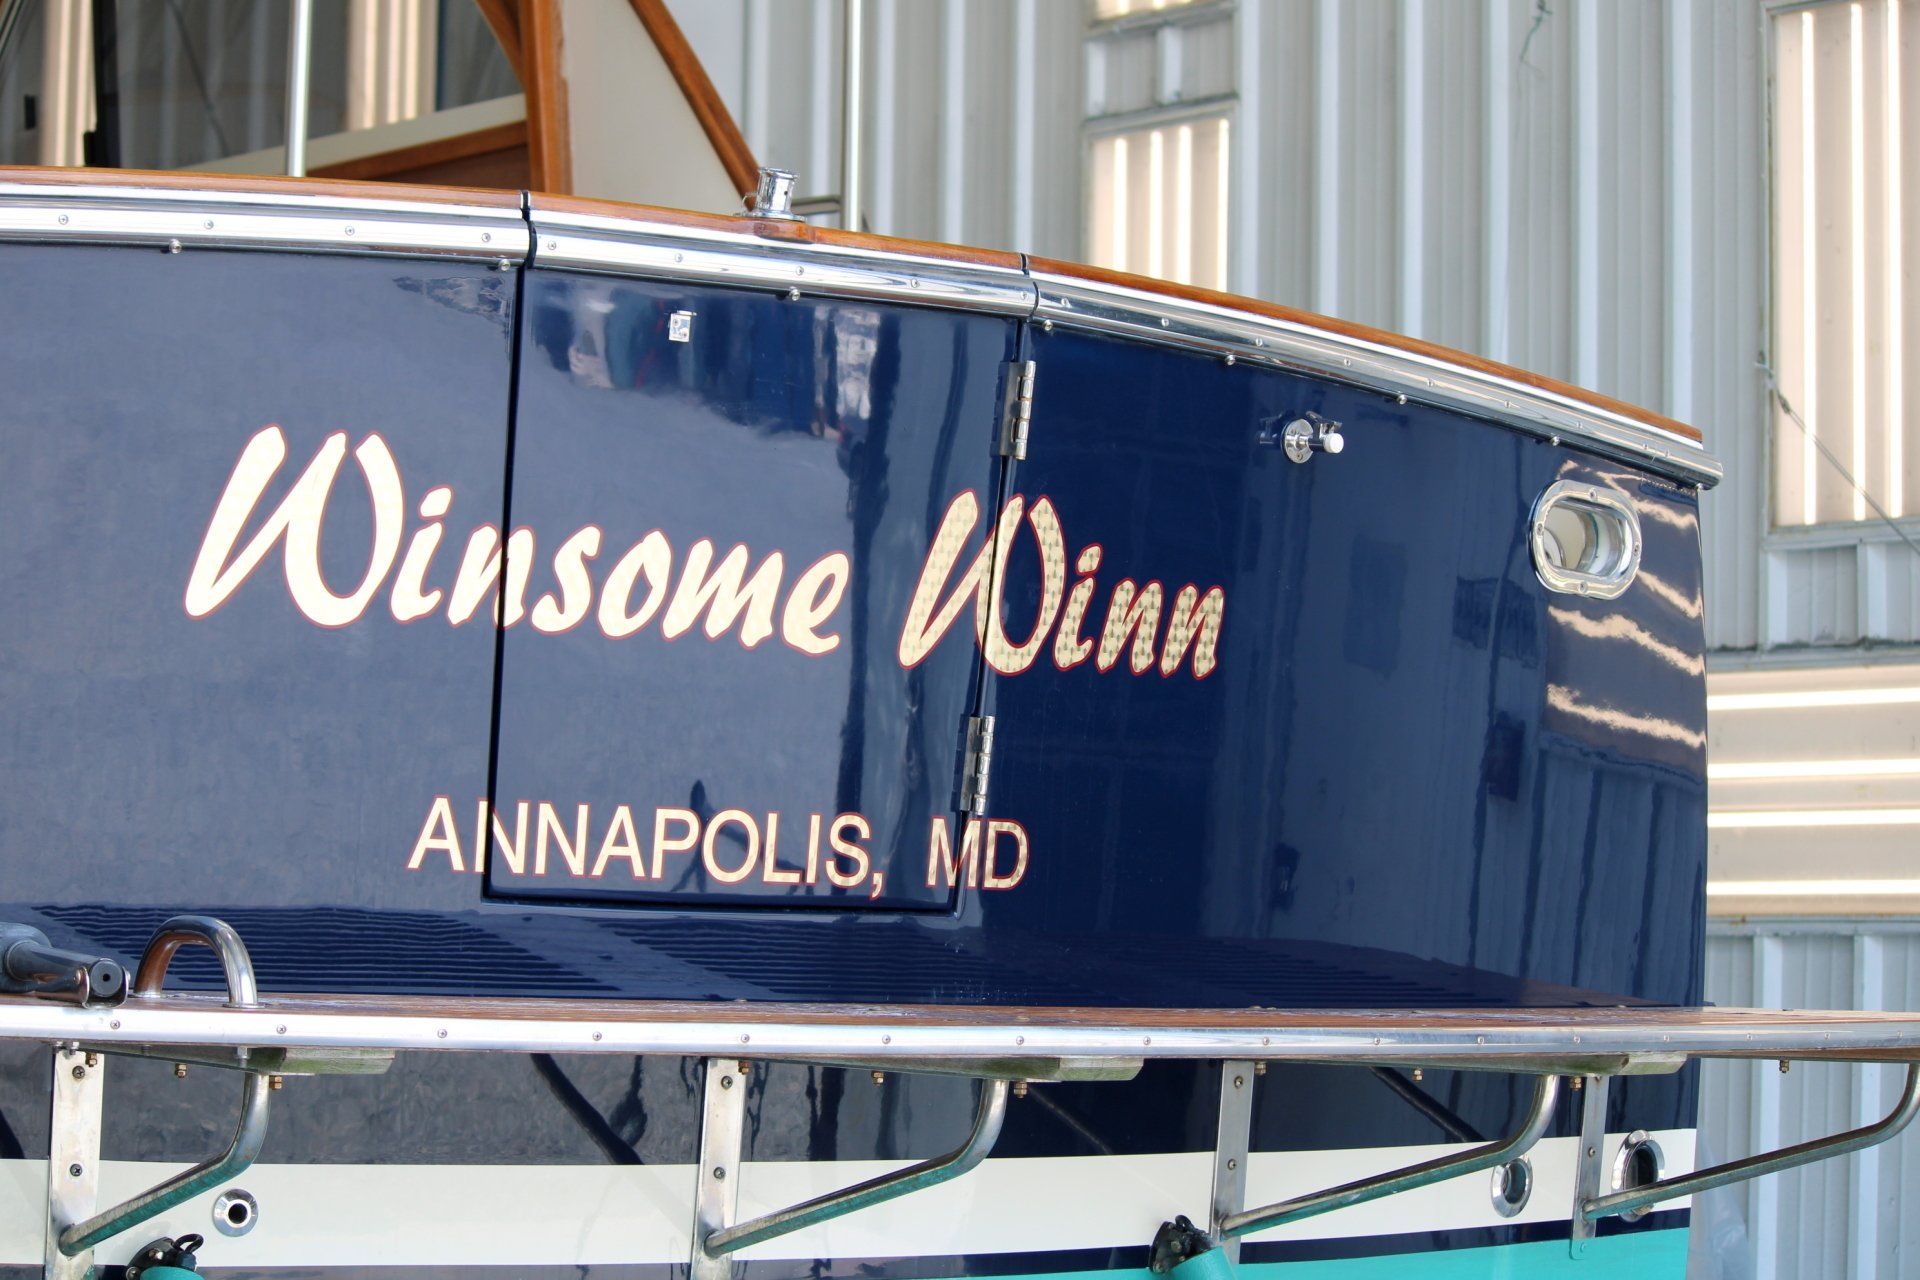 Close-up of paint work on the boat with its name Winsome Winn in view